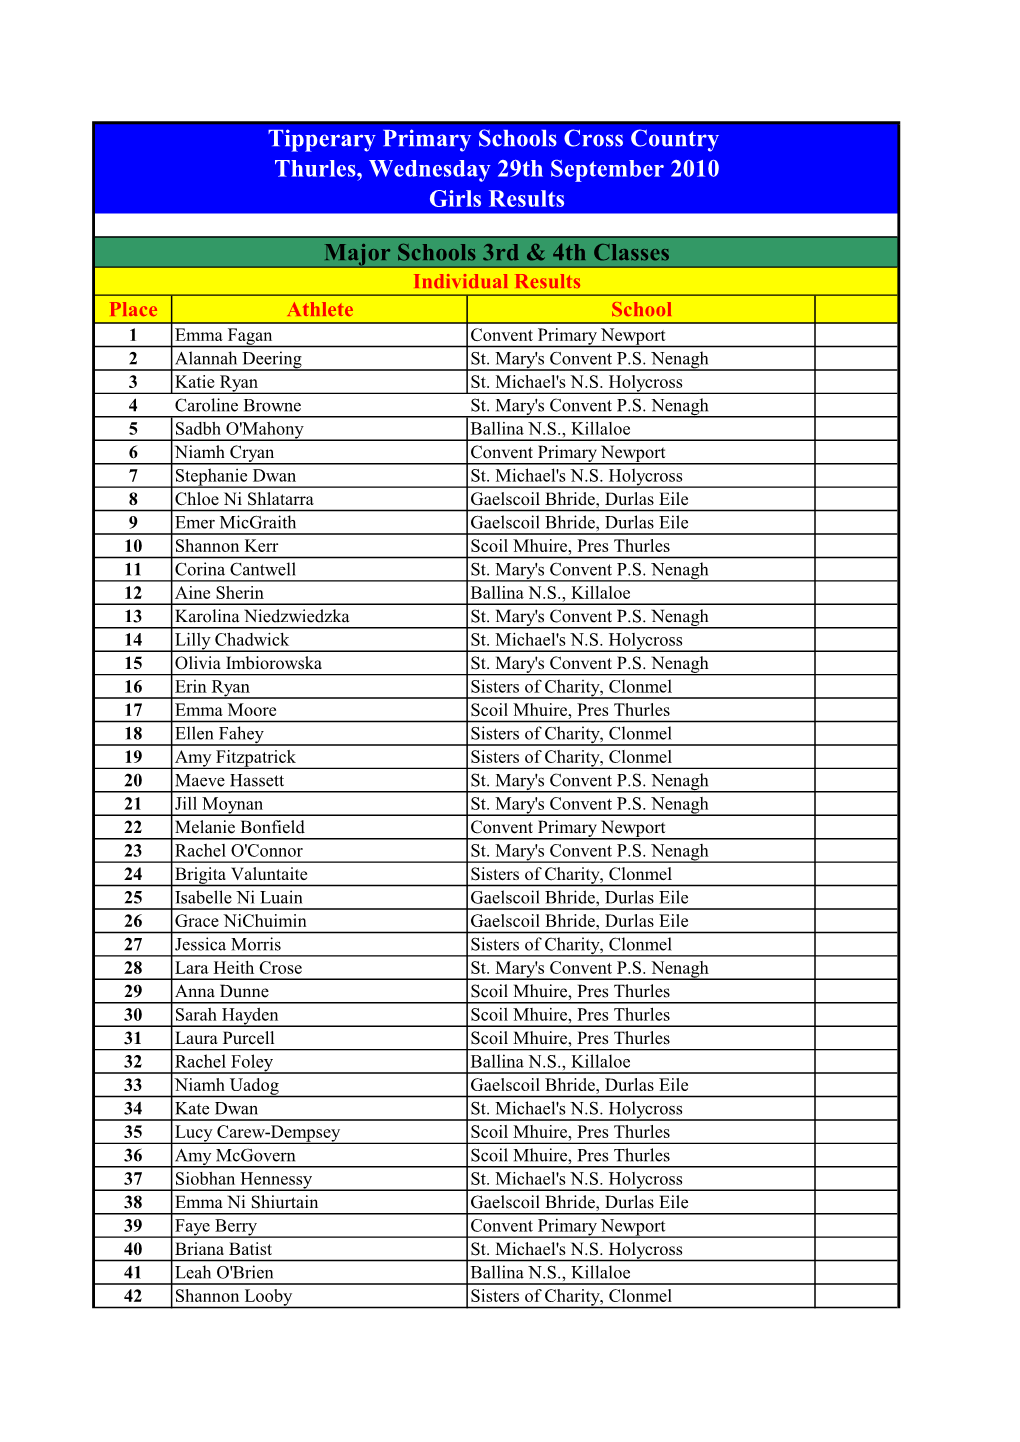 Tipperary Primary Schools Cross Country Thurles, Wednesday 29Th September 2010 Girls Results